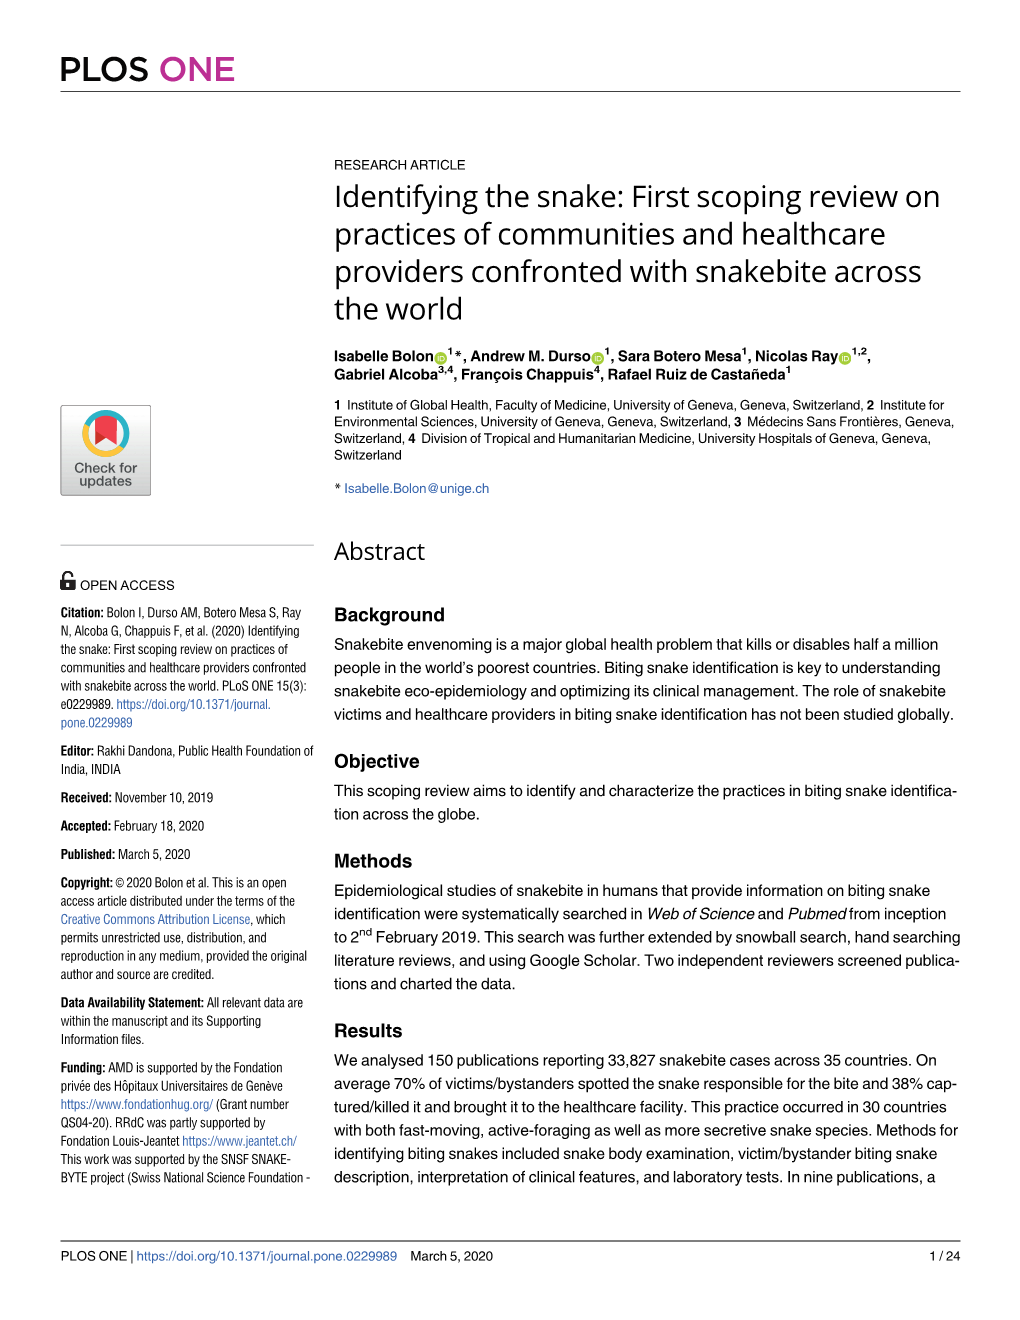 Identifying the Snake: First Scoping Review on Practices of Communities and Healthcare Providers Confronted with Snakebite Across the World